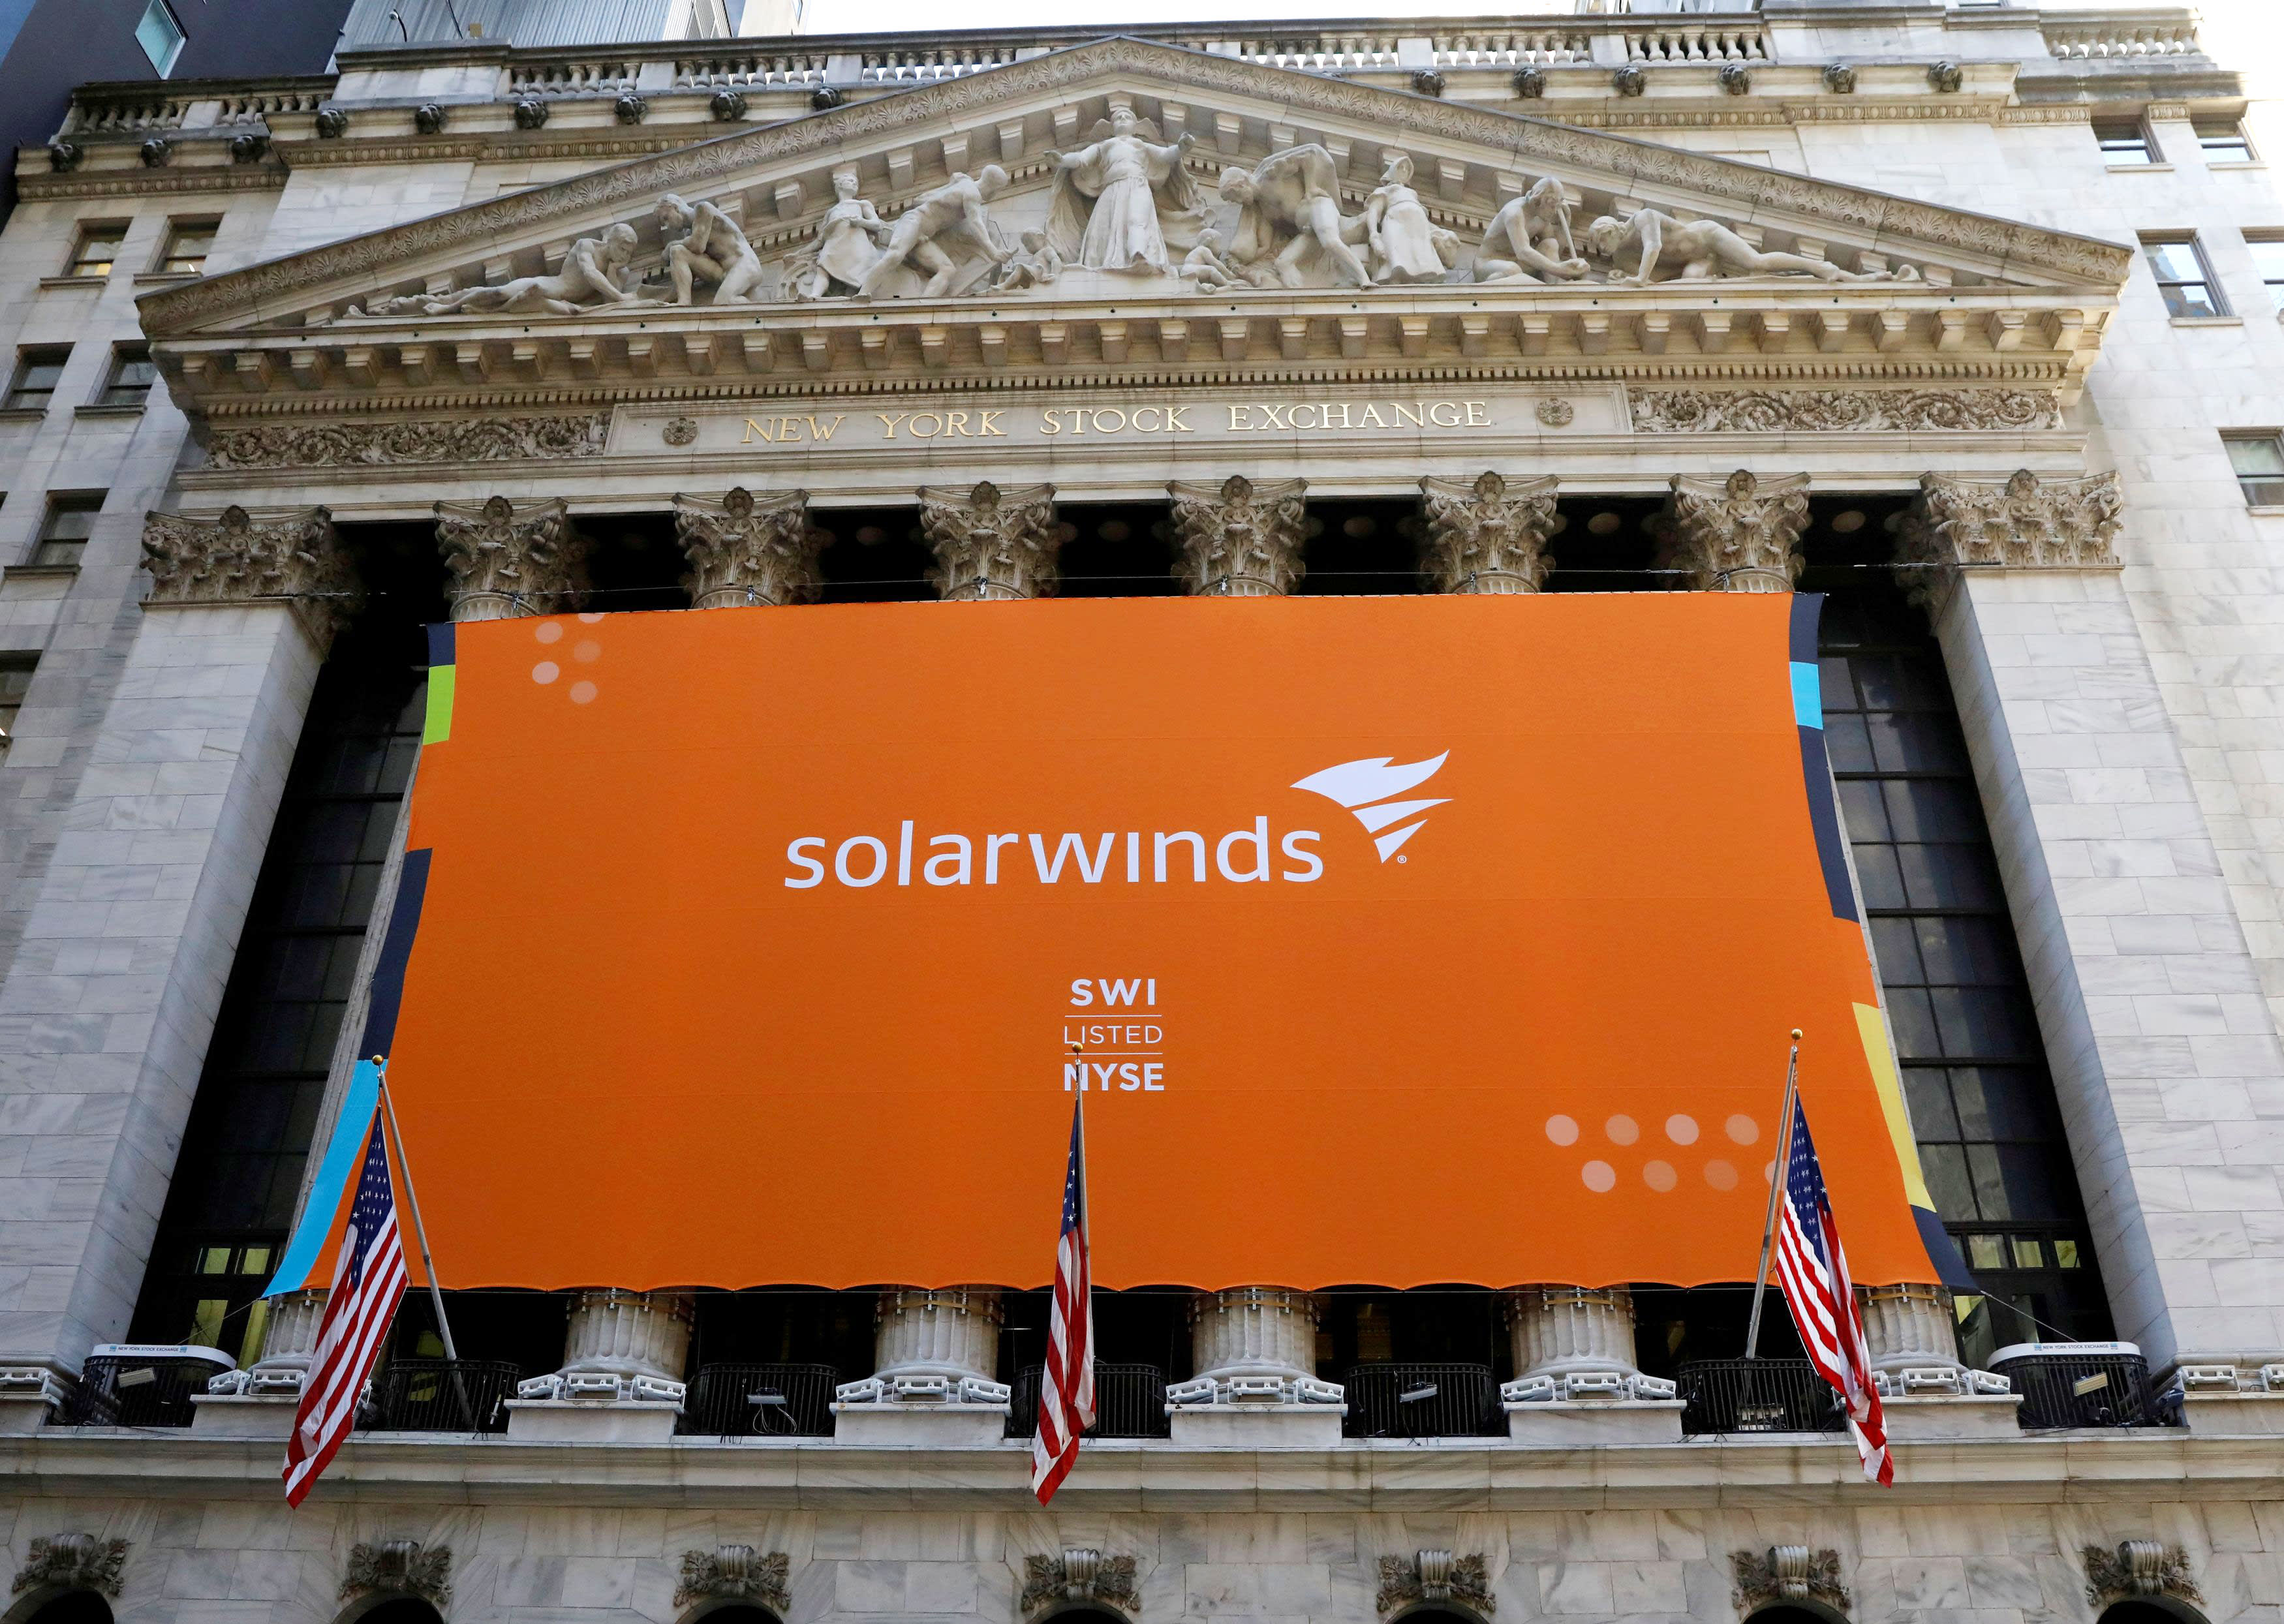 SolarWinds hackers accessed DOJ emails, with no indication that they accessed classified systems